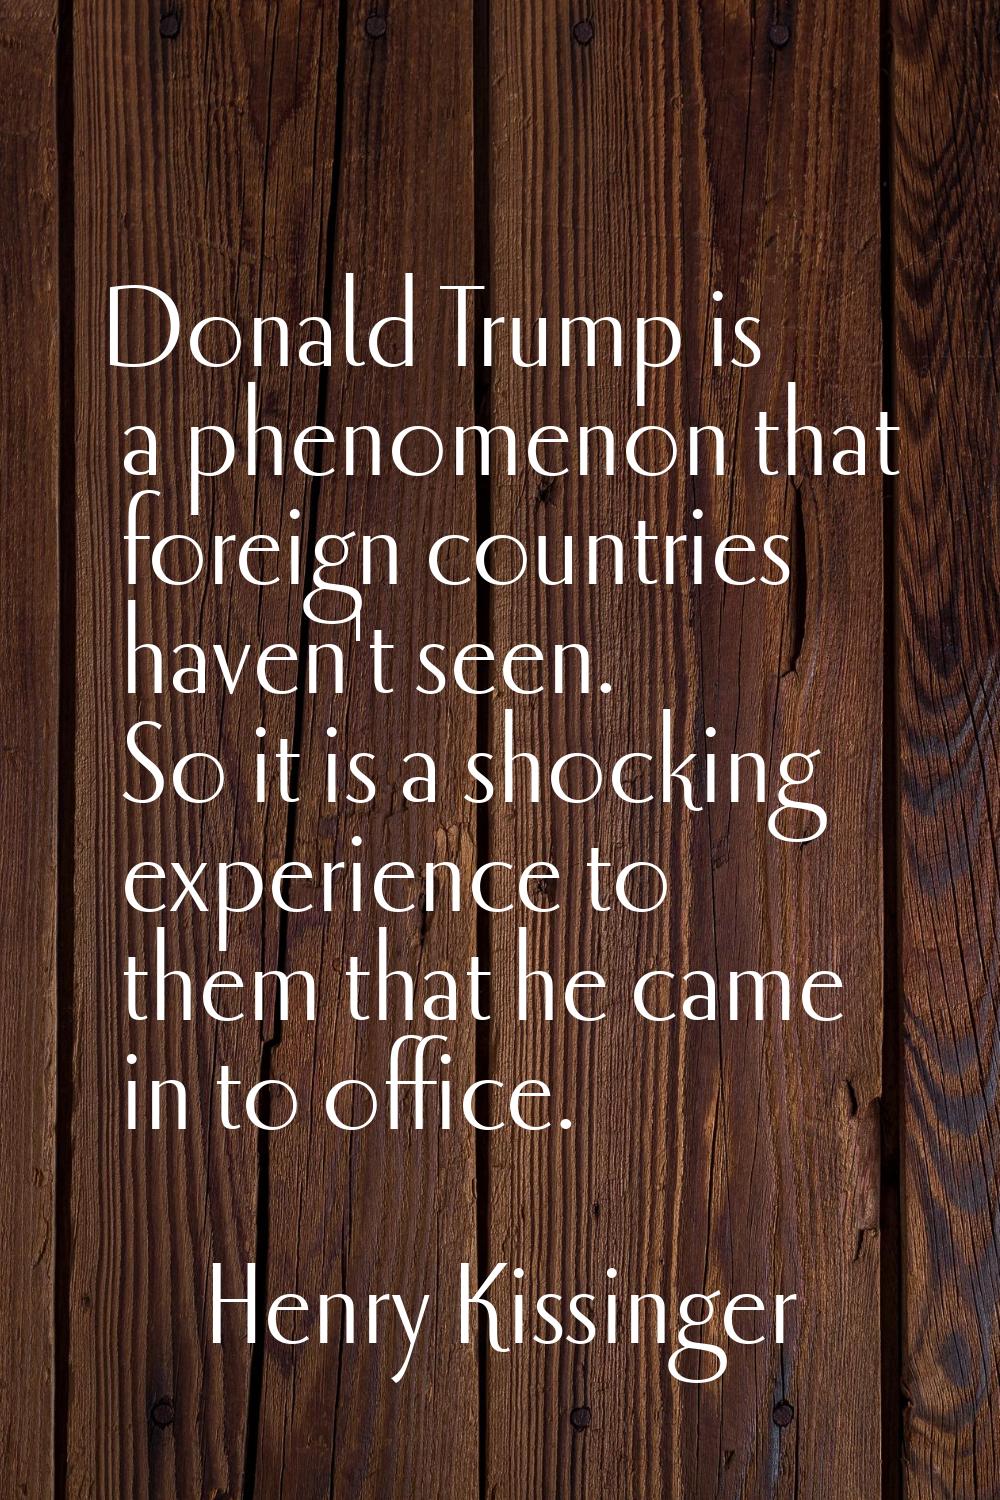 Donald Trump is a phenomenon that foreign countries haven't seen. So it is a shocking experience to